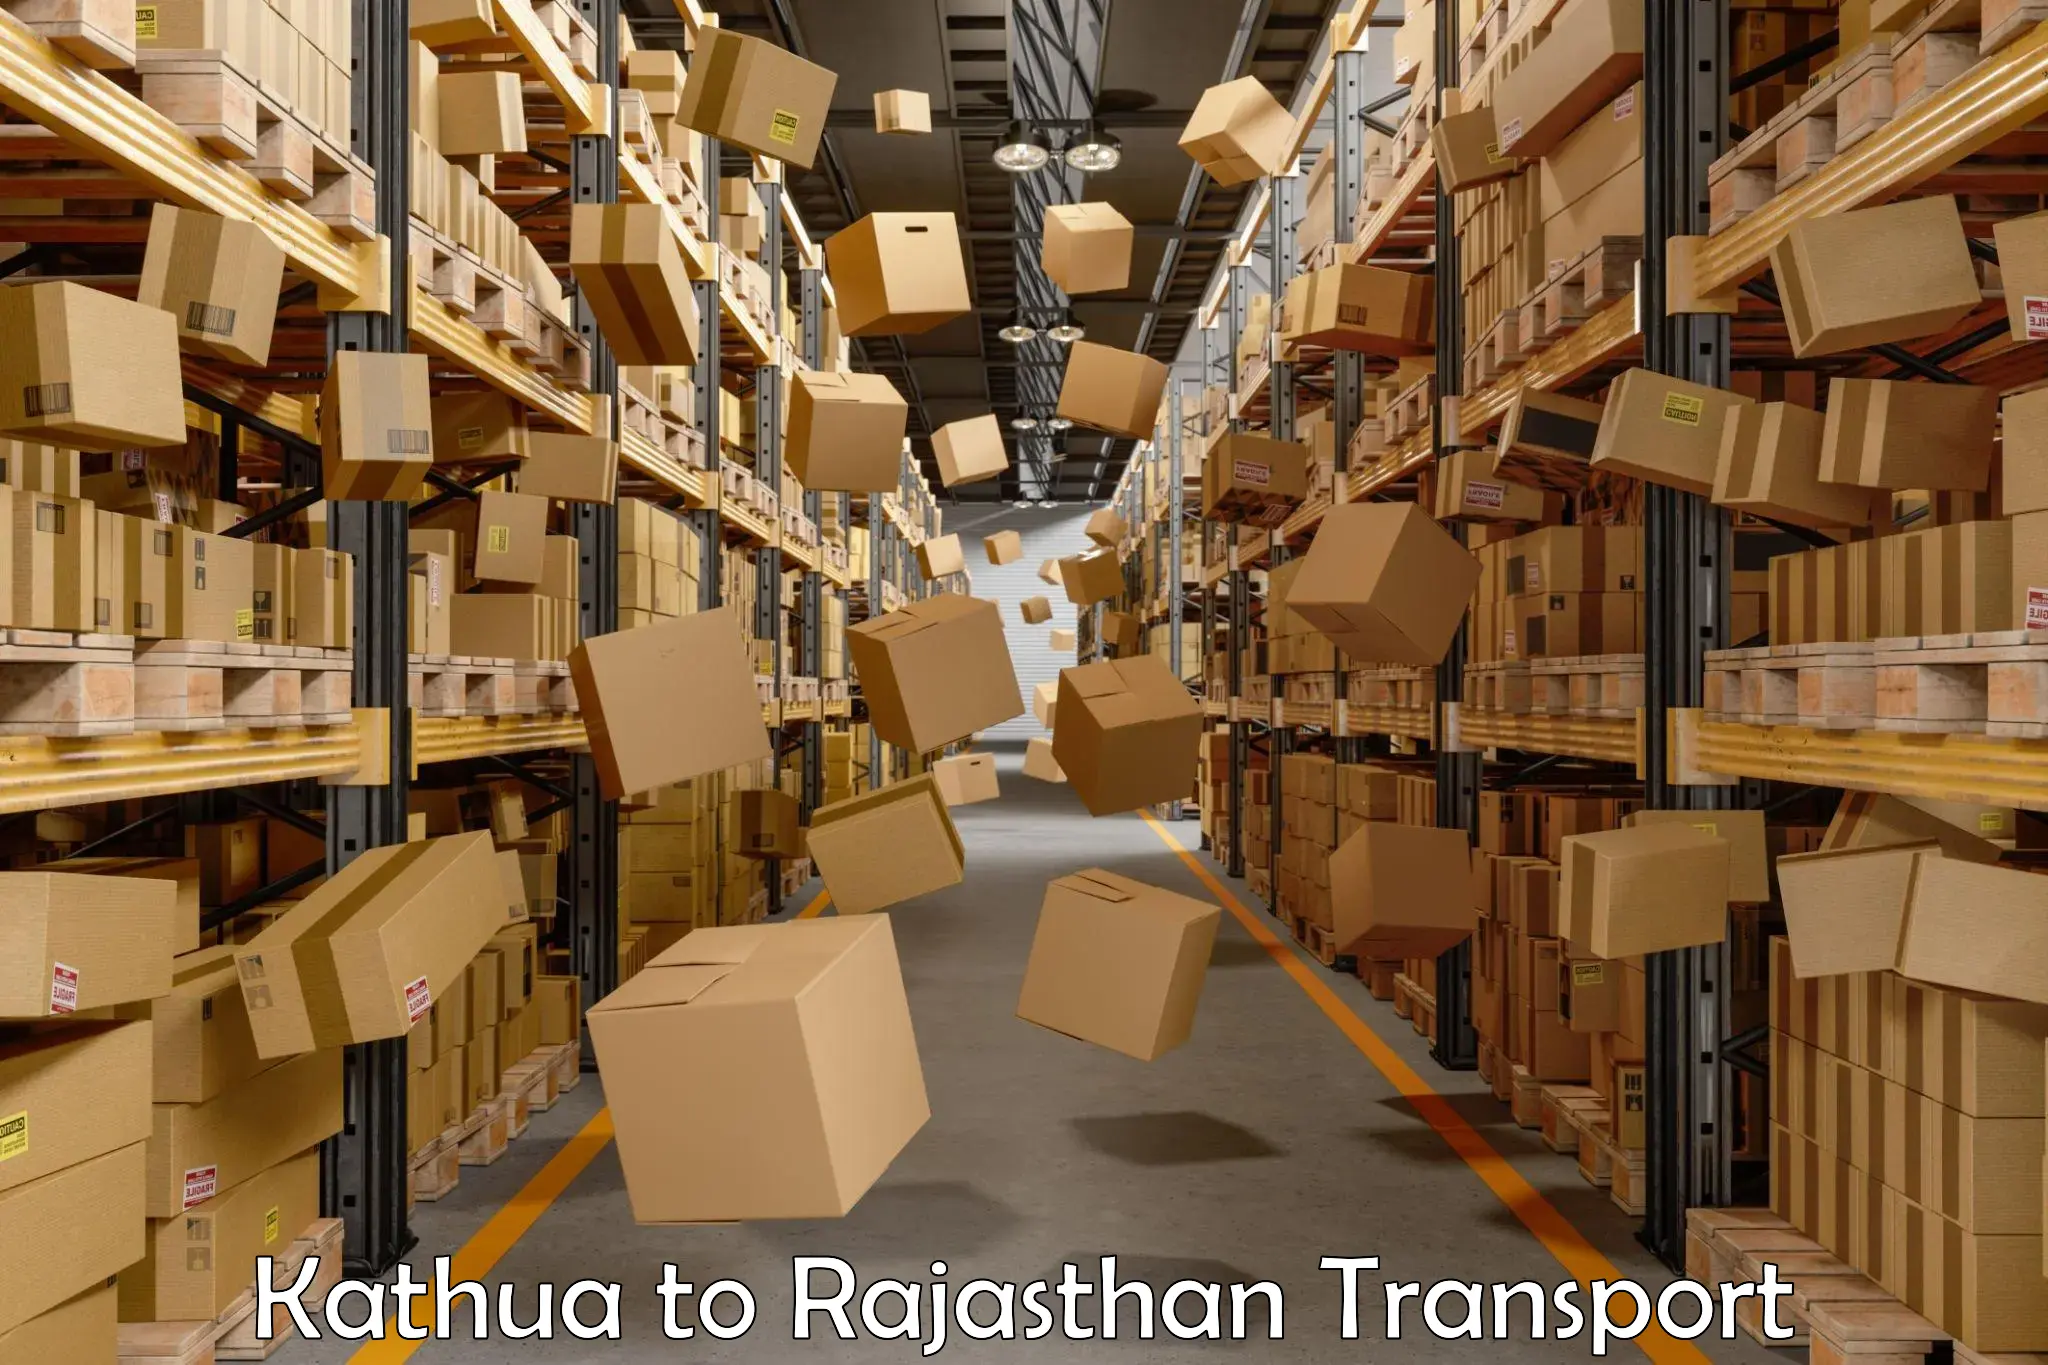 Truck transport companies in India Kathua to Rajasthan